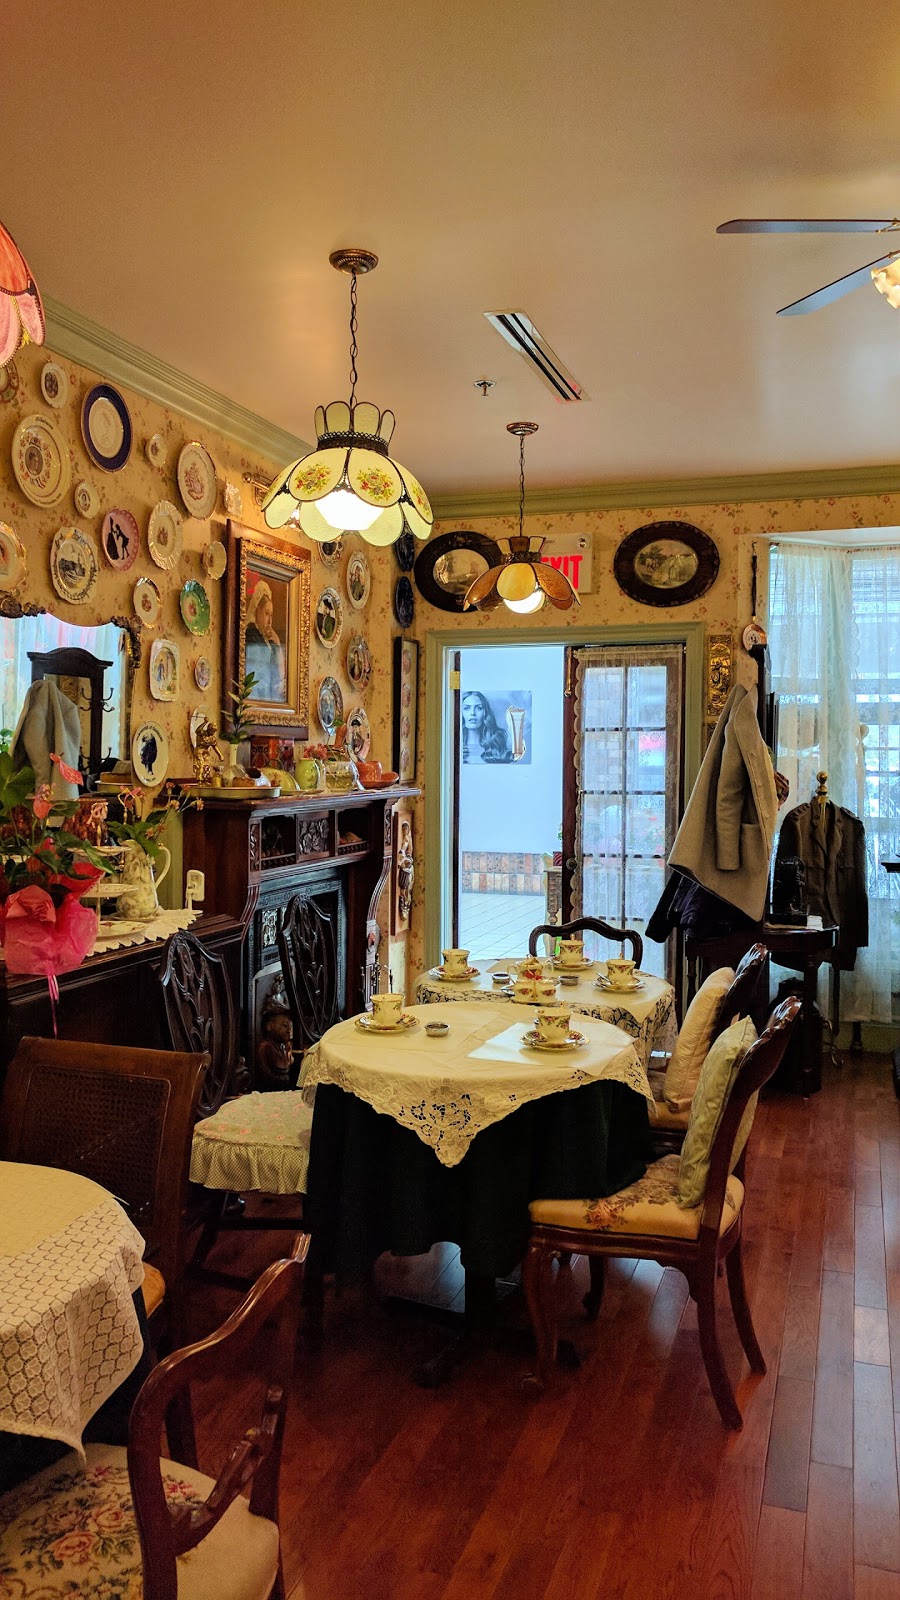 After Queen Tea Shop | cafe | 7355 Bayview Ave, Thornhill, ON L3T 5Z2, Canada | 6476278580 OR +1 647-627-8580